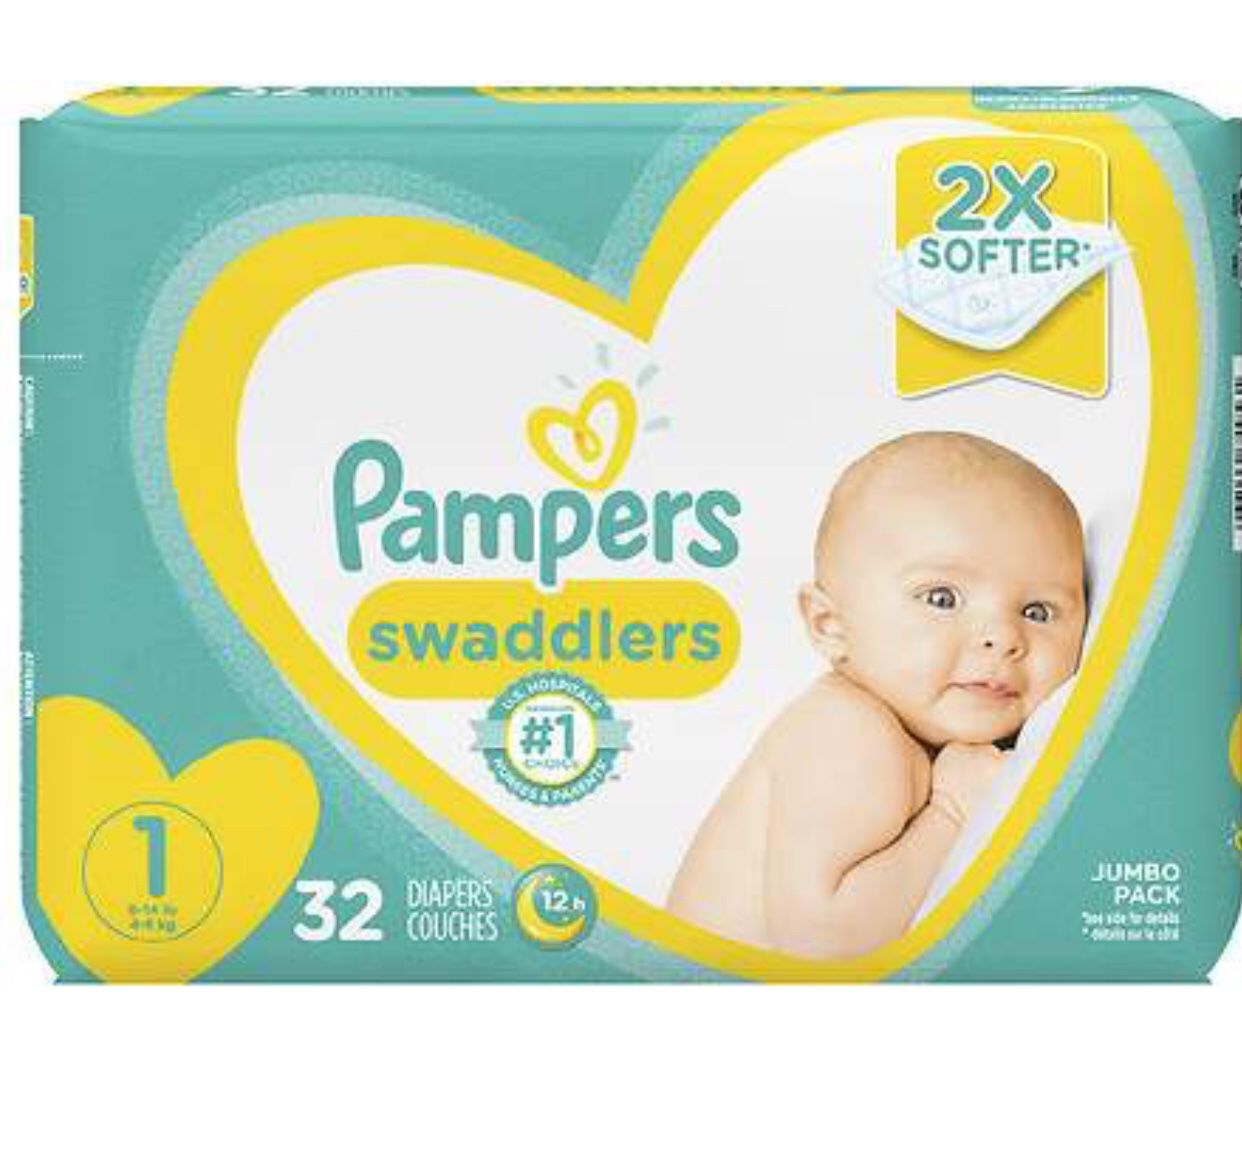 Pampers Diapers Size 1 - 32 Diapers Each Pack